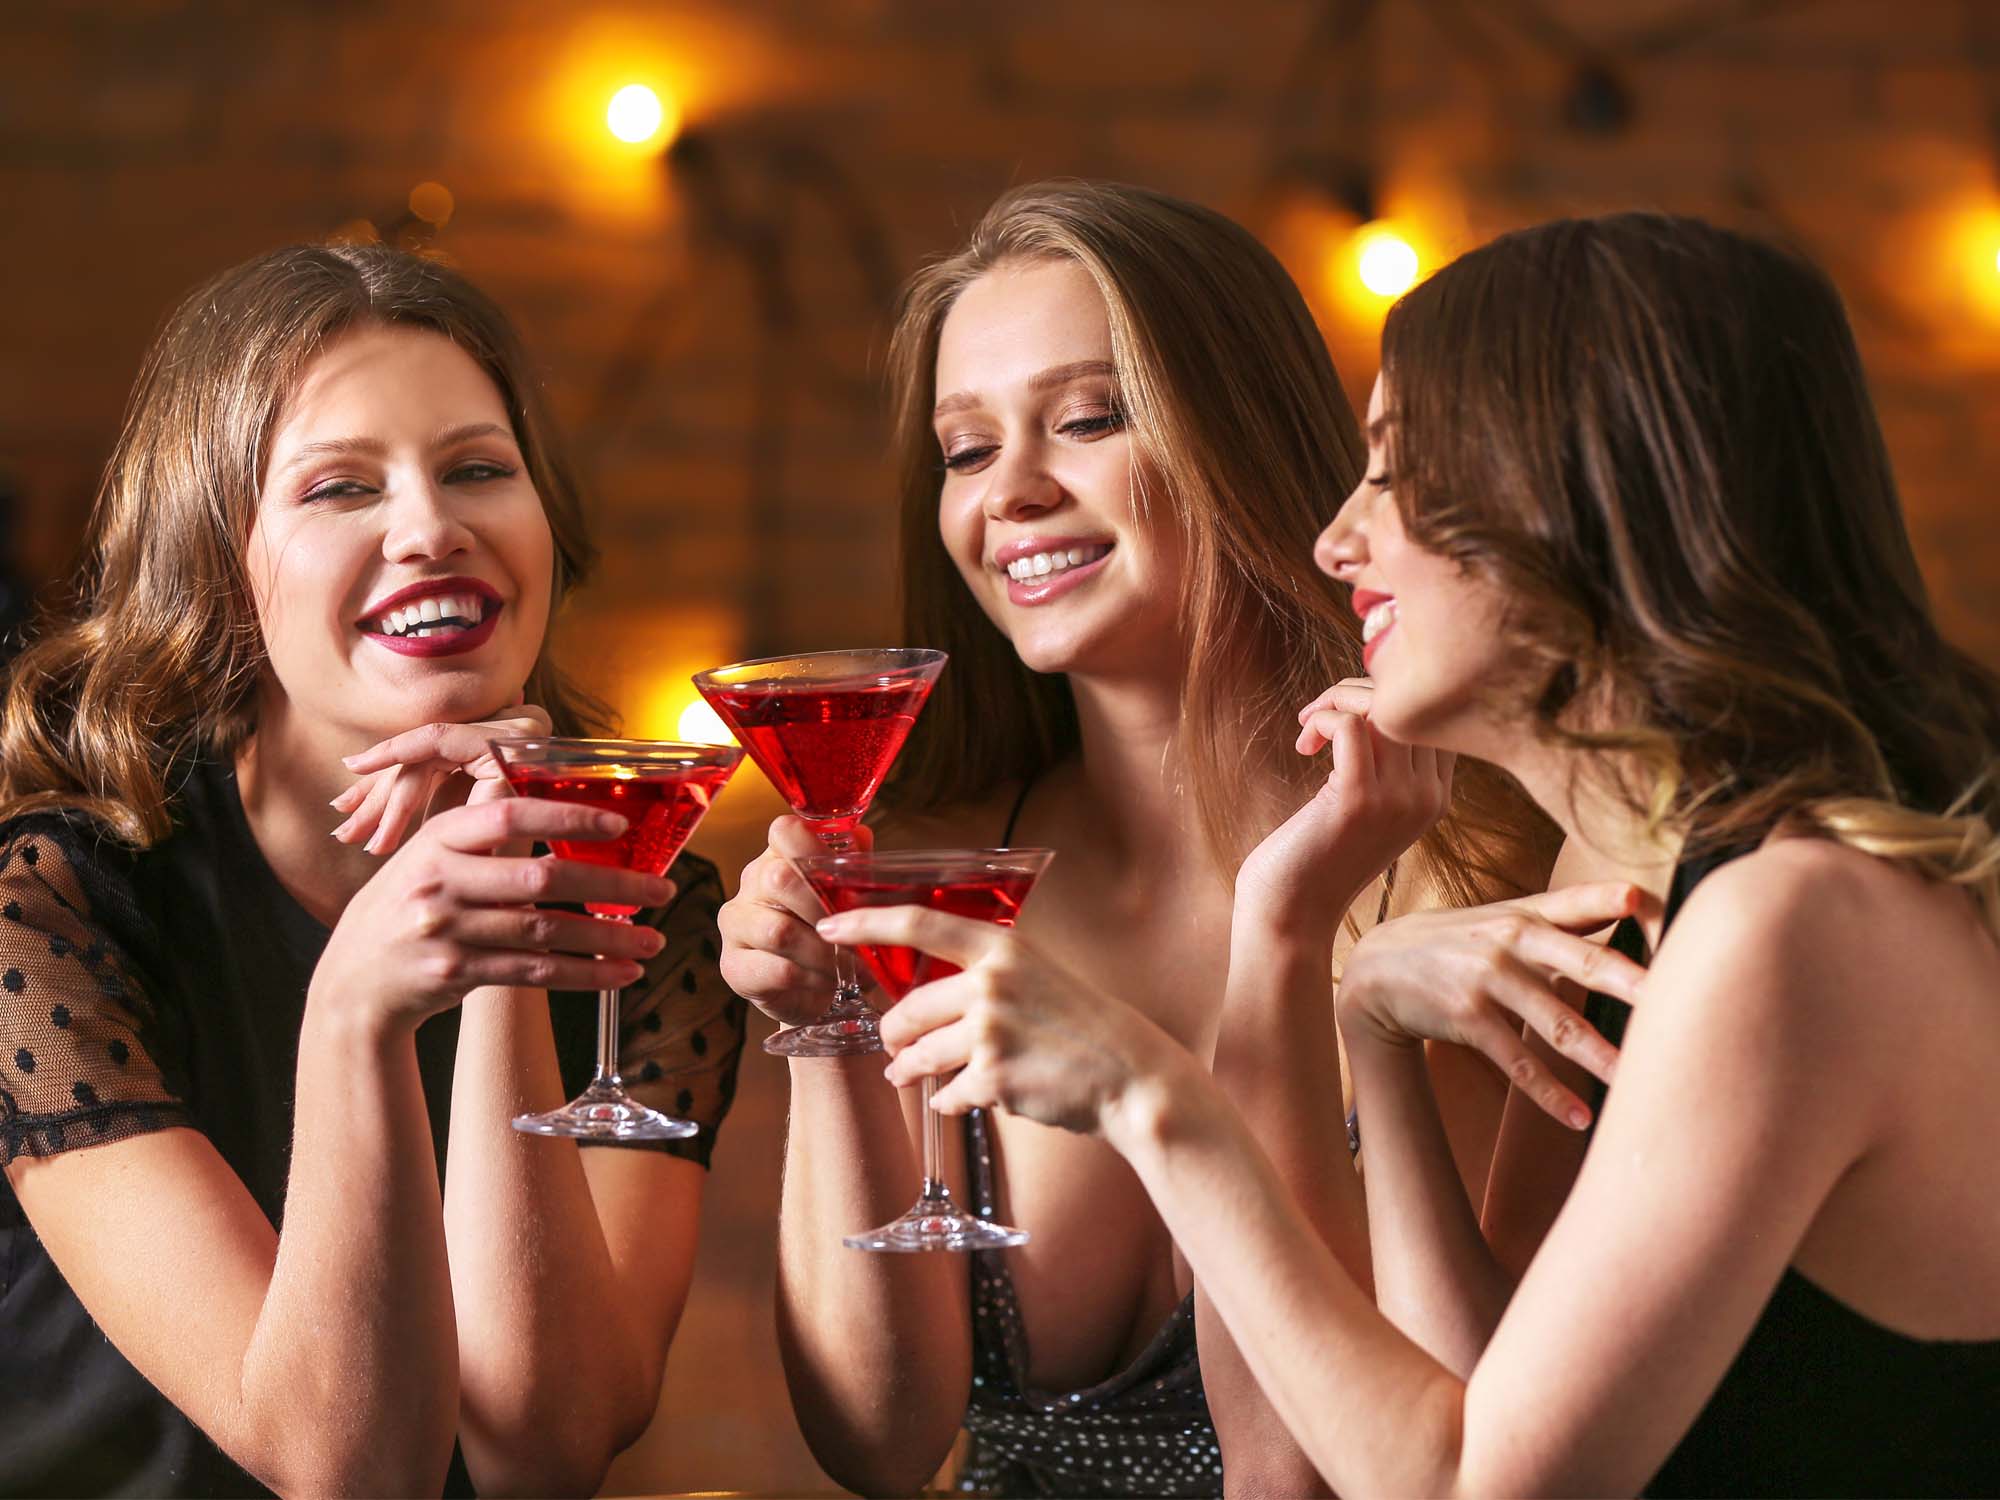 Dress Codes for Parties - Cocktail